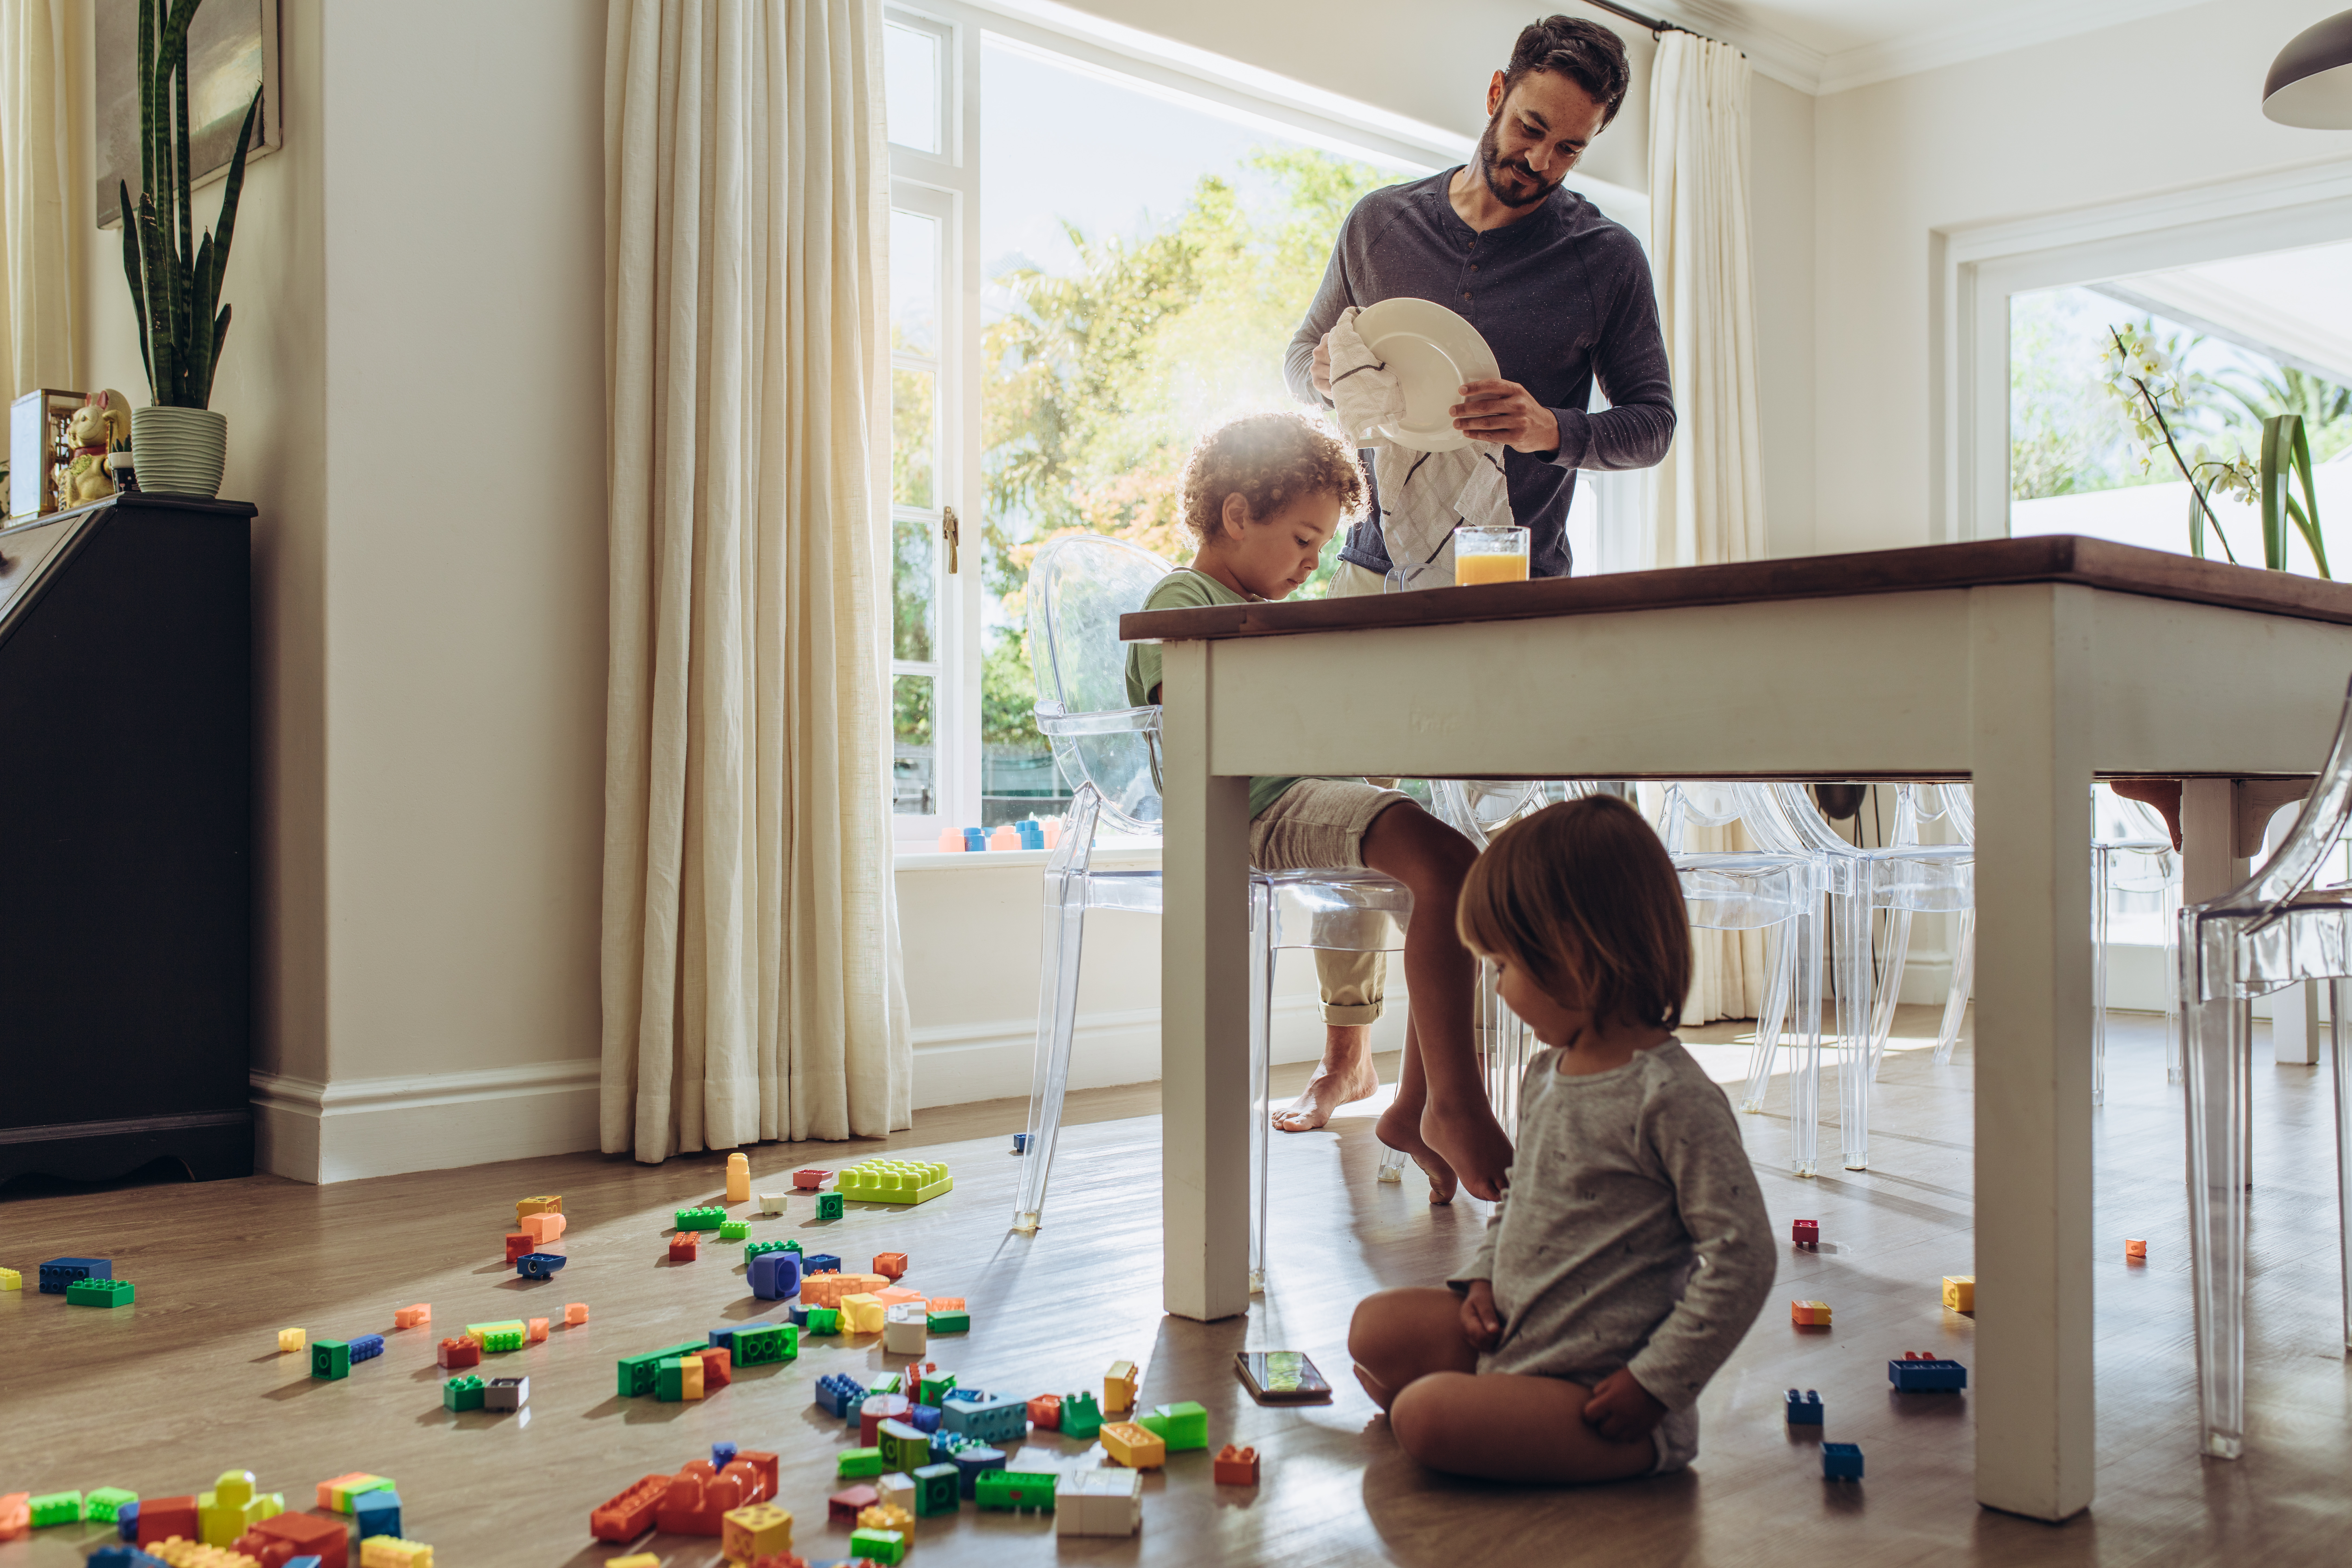 Liberty Home flooring is family-friendly